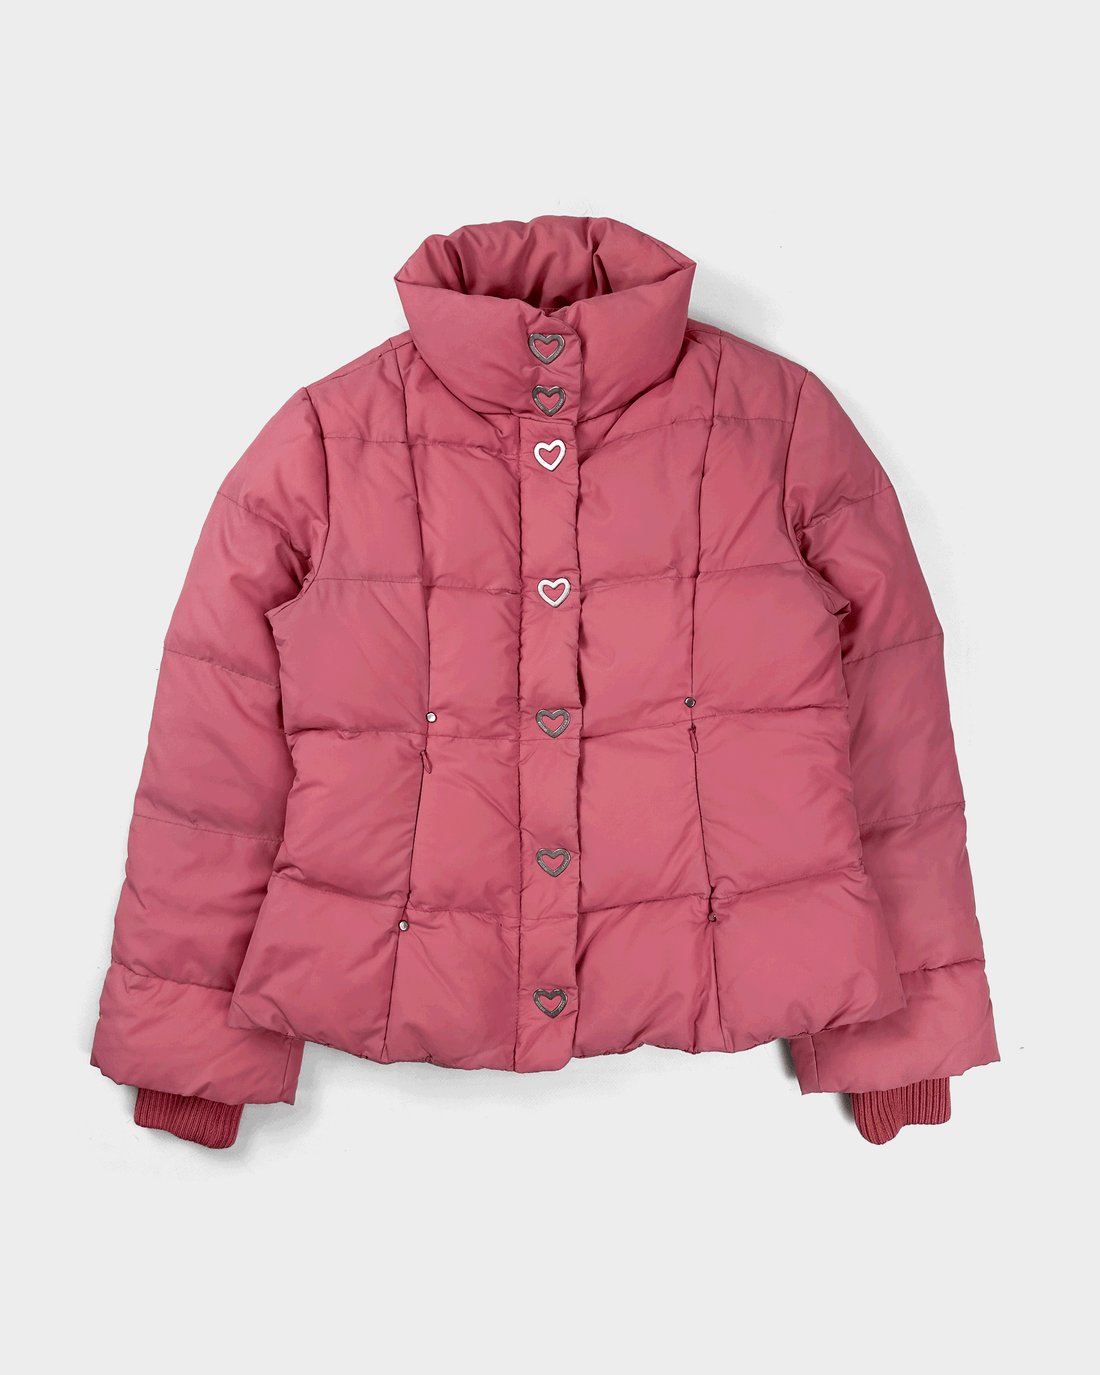 Moschino Silver Hearts Pink Puffer Jacket 2000's